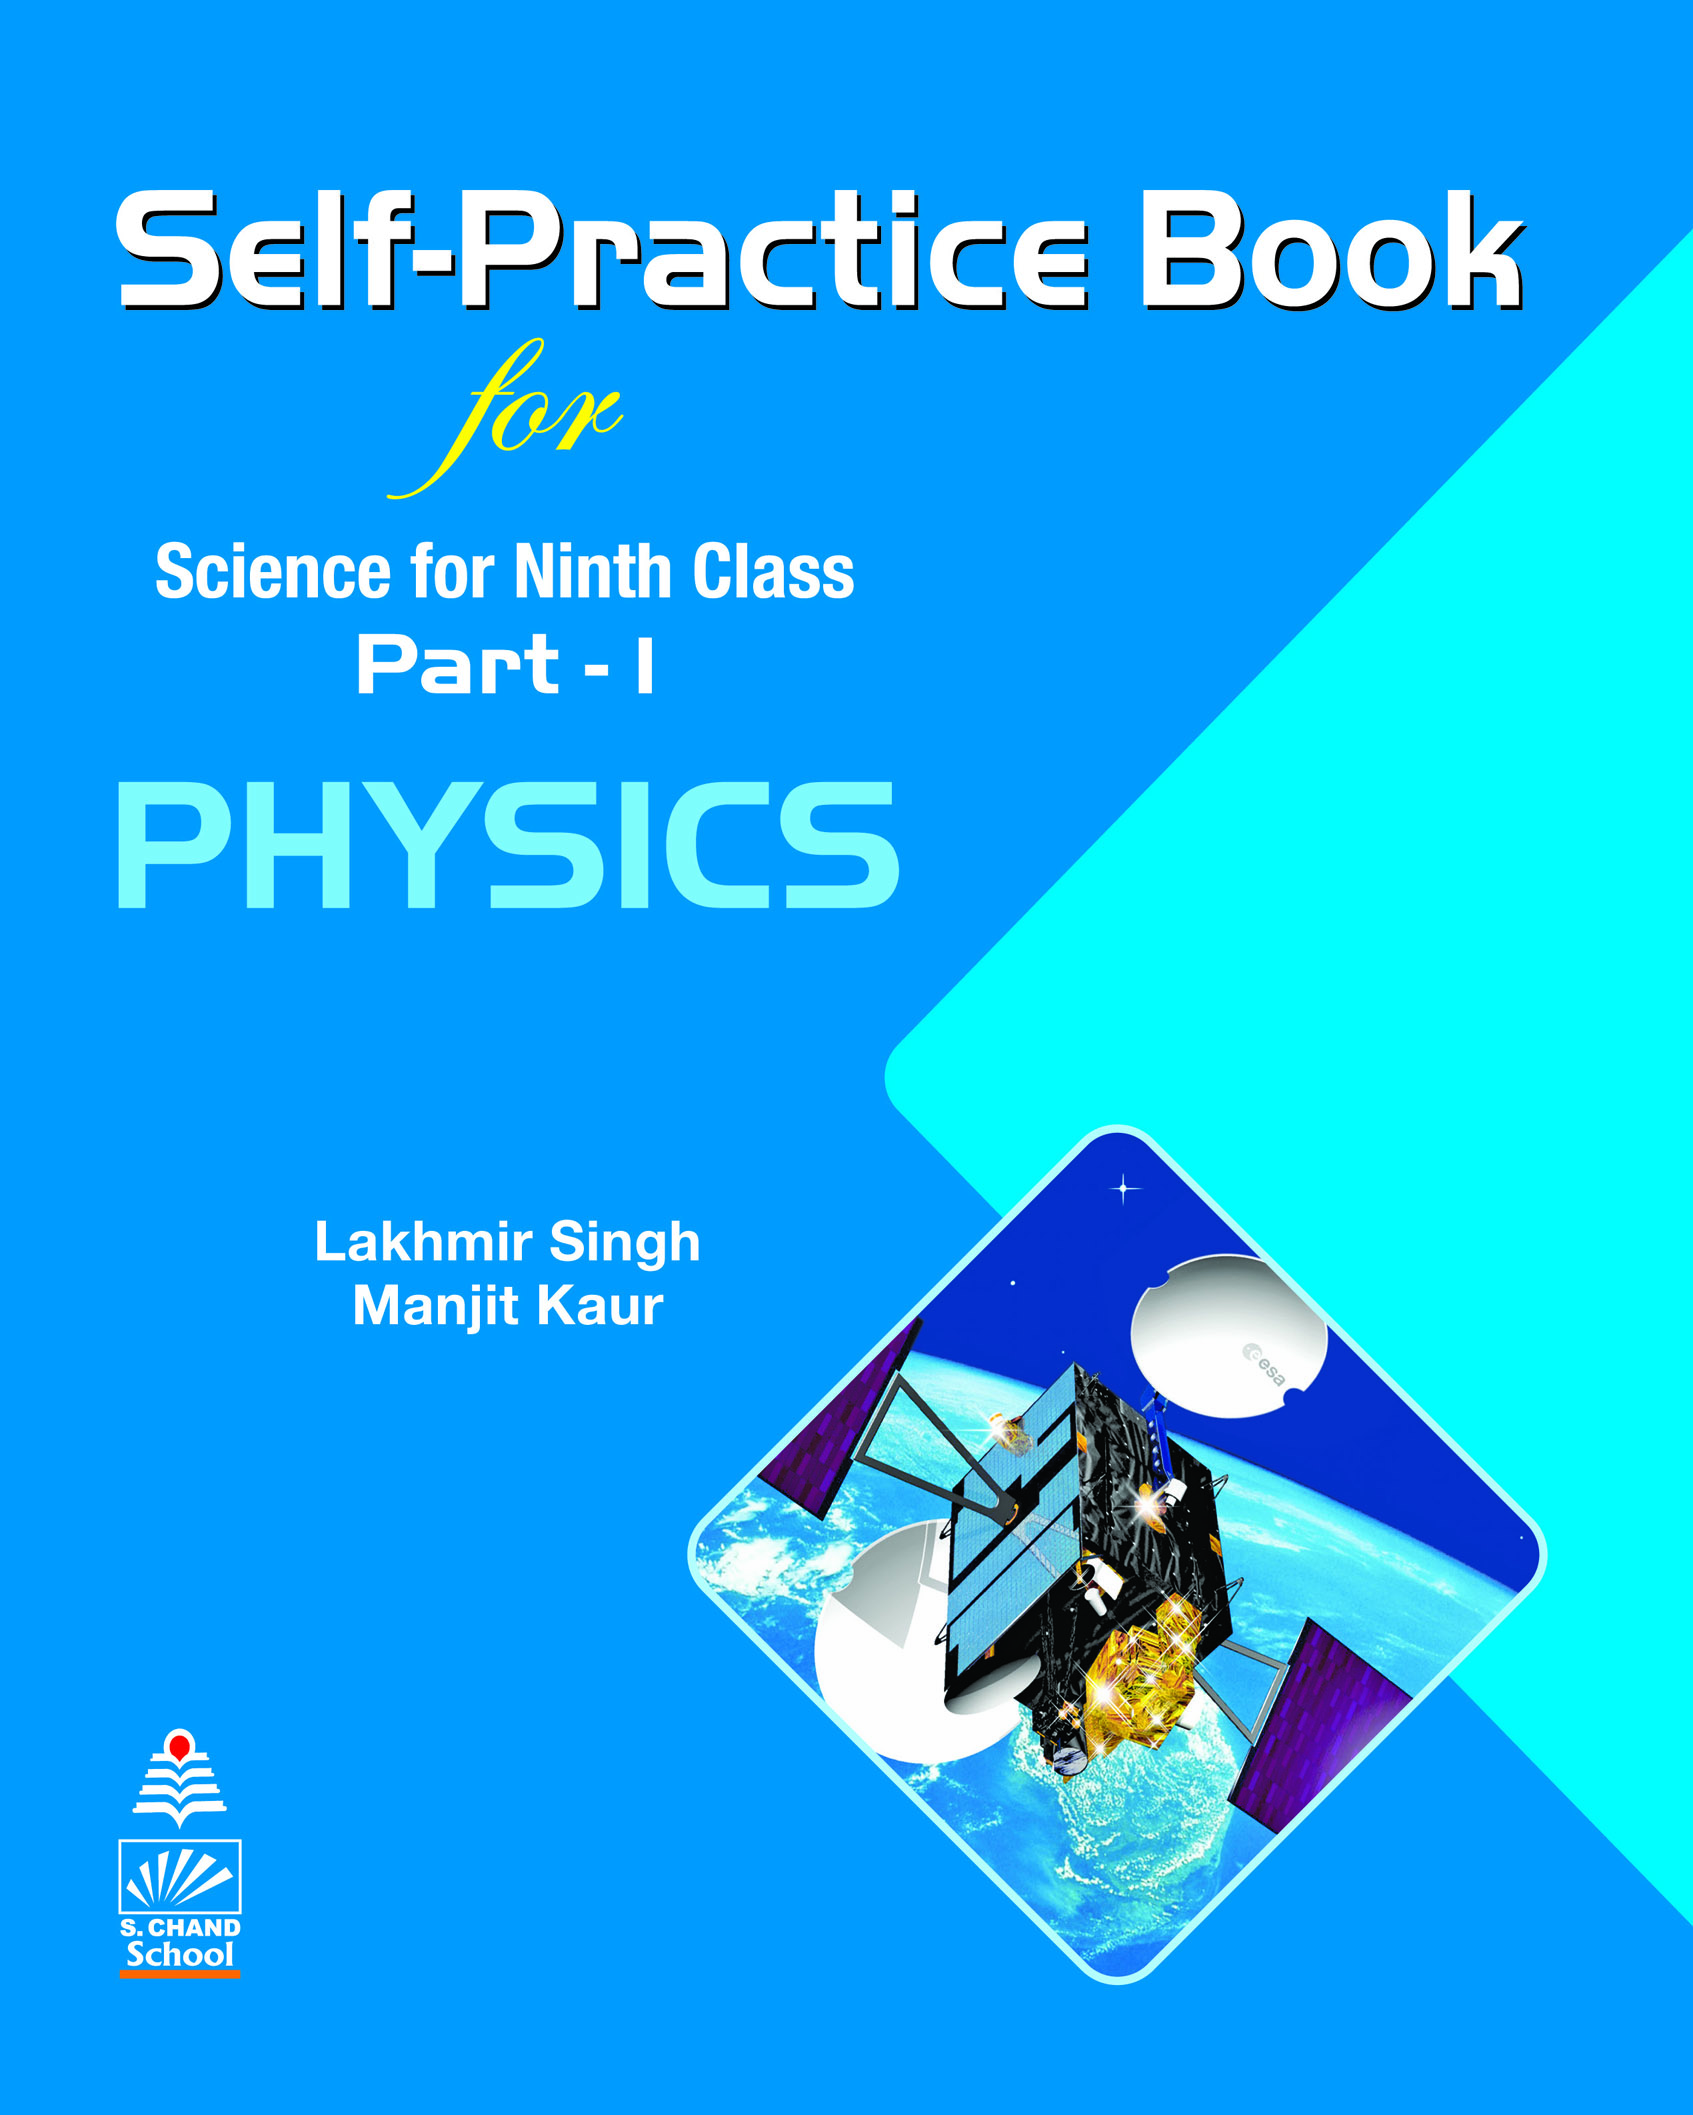 Self-Practice Book for Science for Ninth Class Part-1 PHYSICS